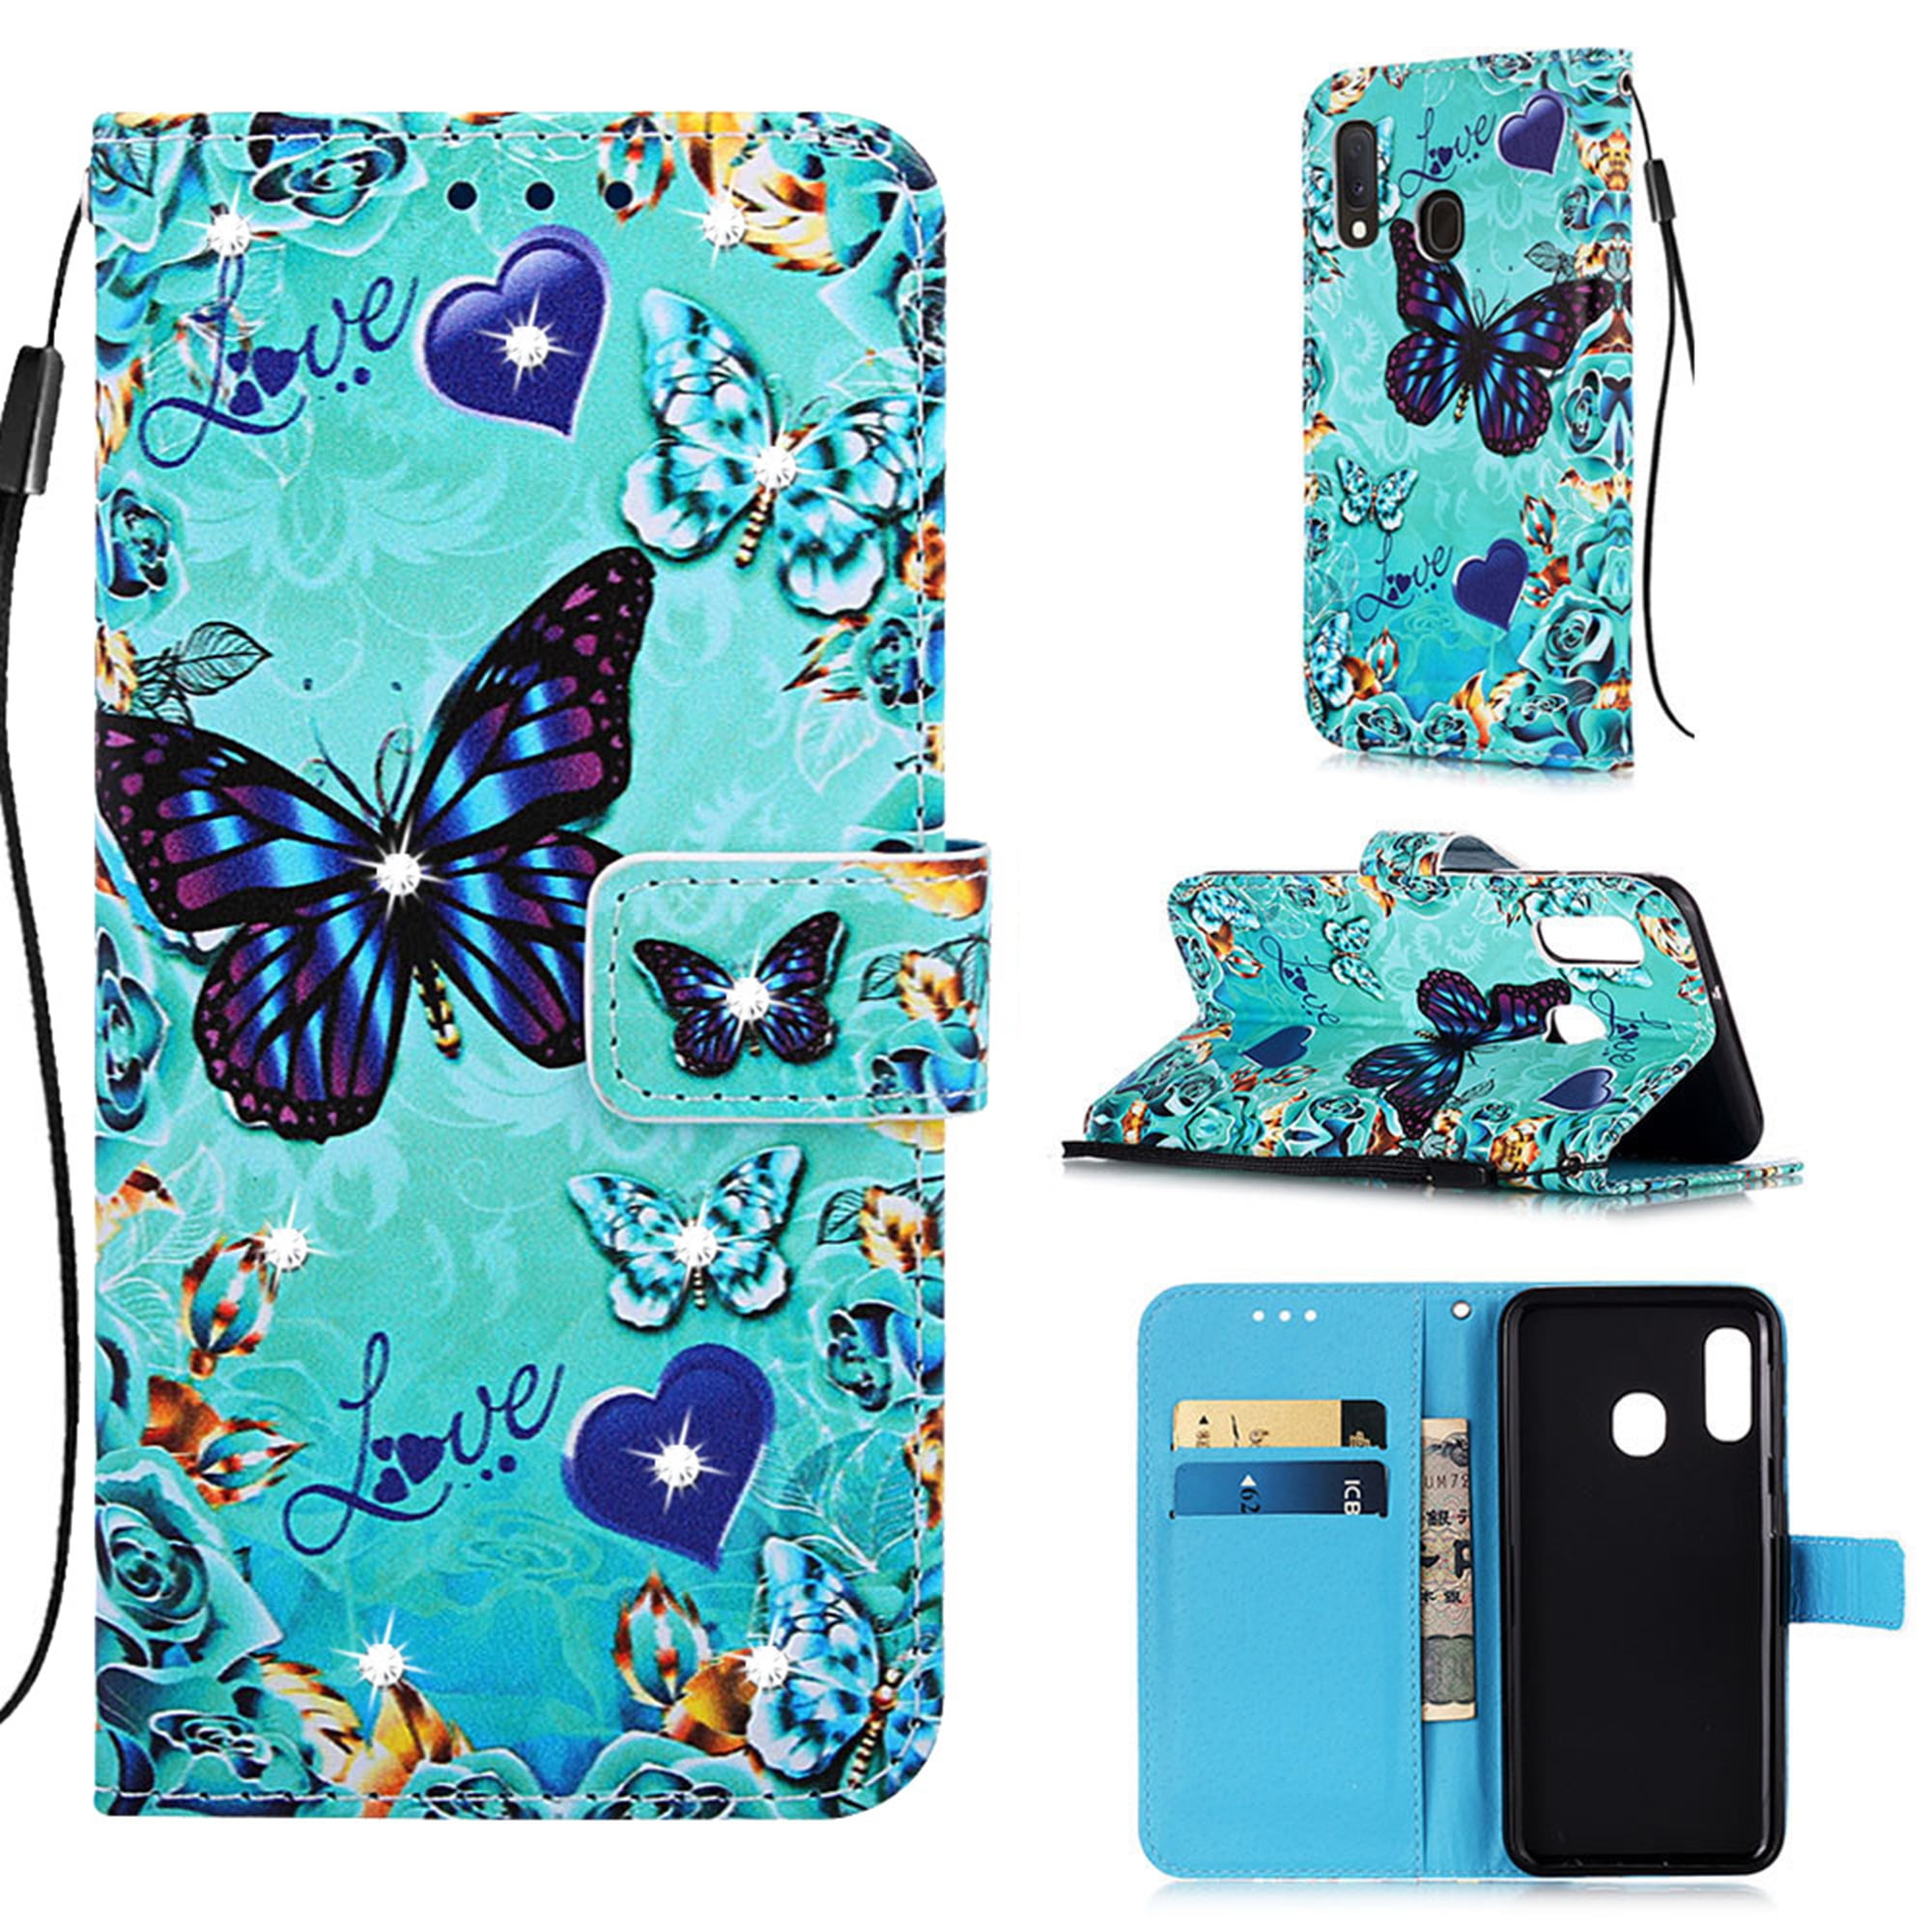 Bling Clear Crystal Diamond PU Leather Flip Notebook Wallet Case Embossed Buterfly Floral with Kickstand Card Holder Slot Protective Skin Cover for Samsung Galaxy A6 Blue Samsung Galaxy A6 Case